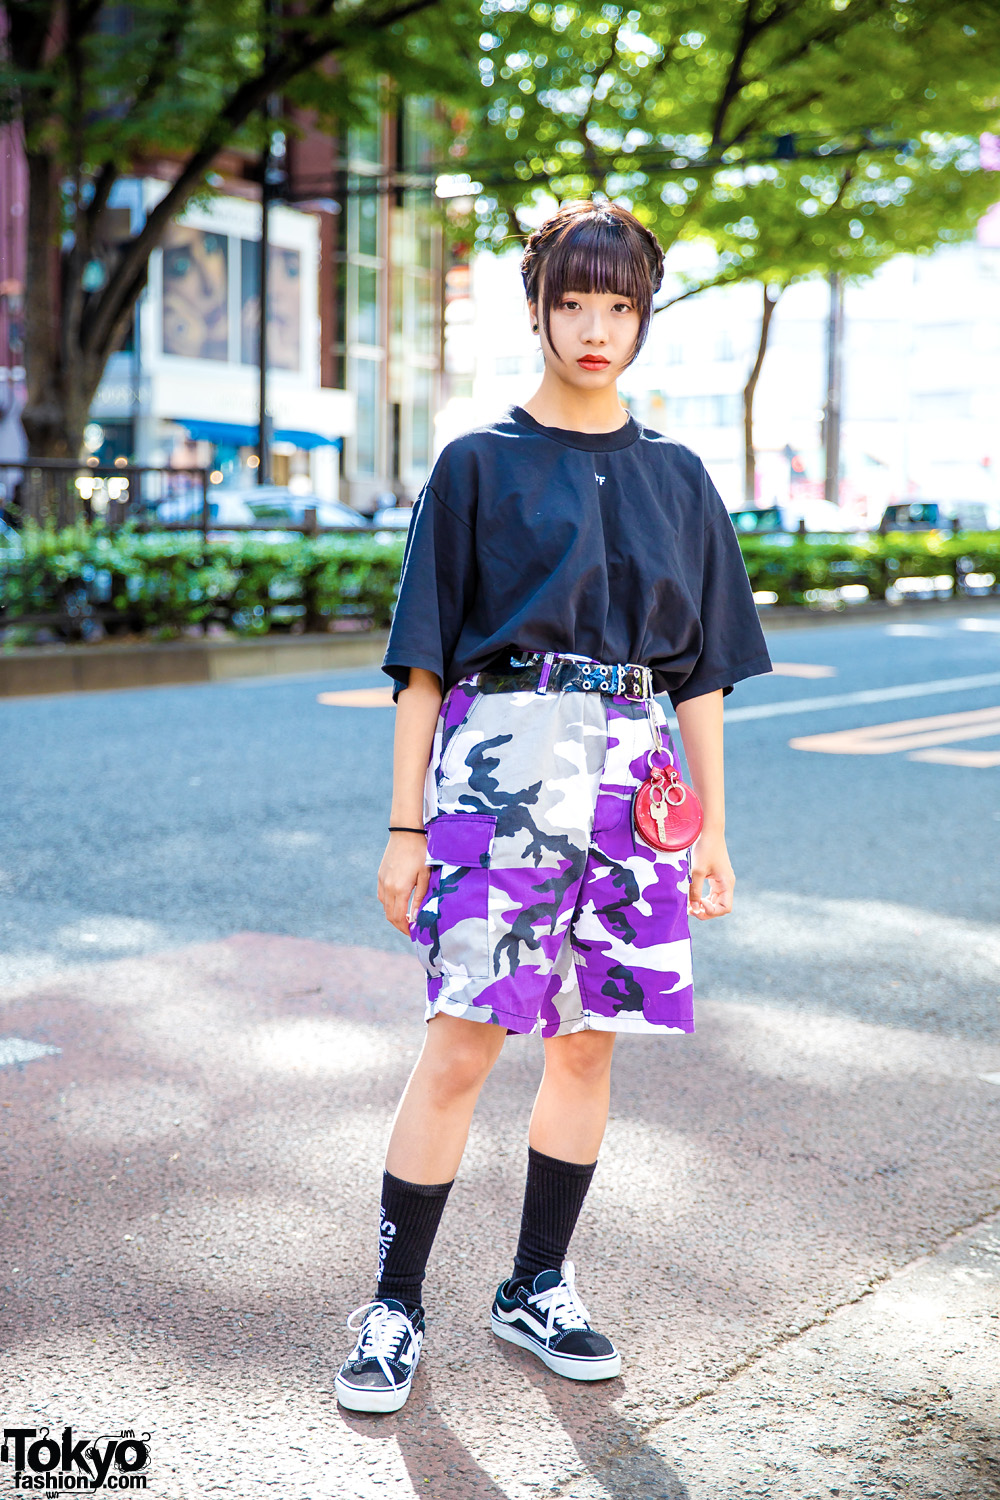 Harajuku Casual Street Style w/ Off-White Shirt, Rothco Purple Camouflage Print Shorts & Vans Sneakers